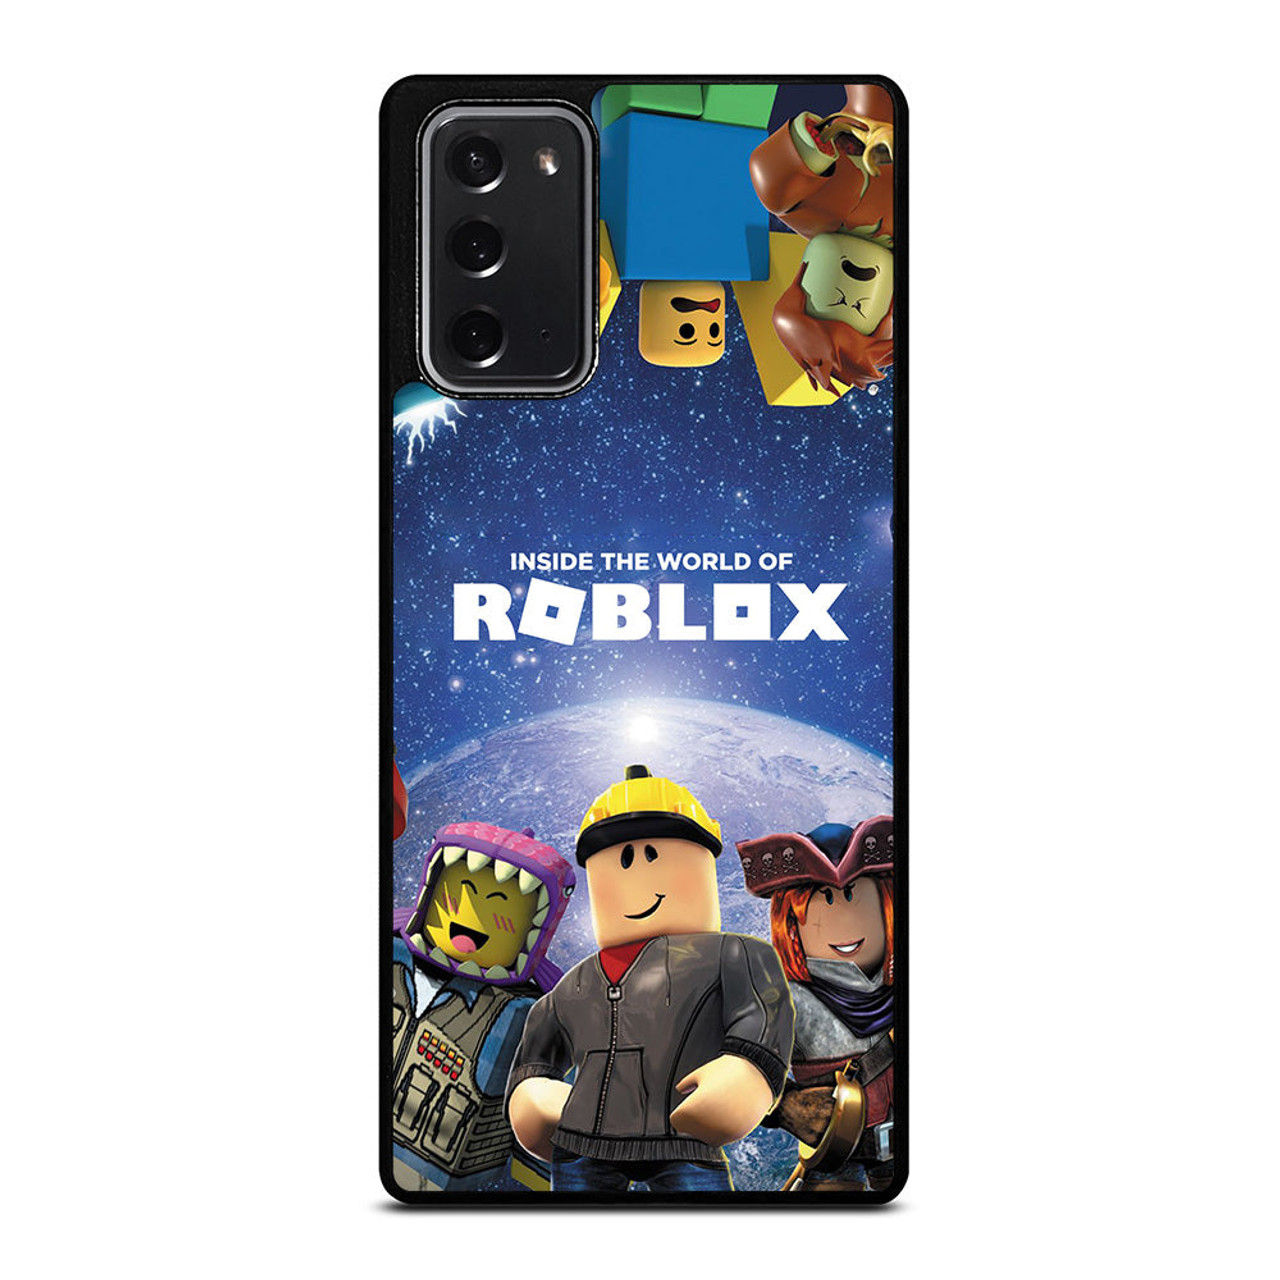 Found another Samsung Roblox experience : r/slgg